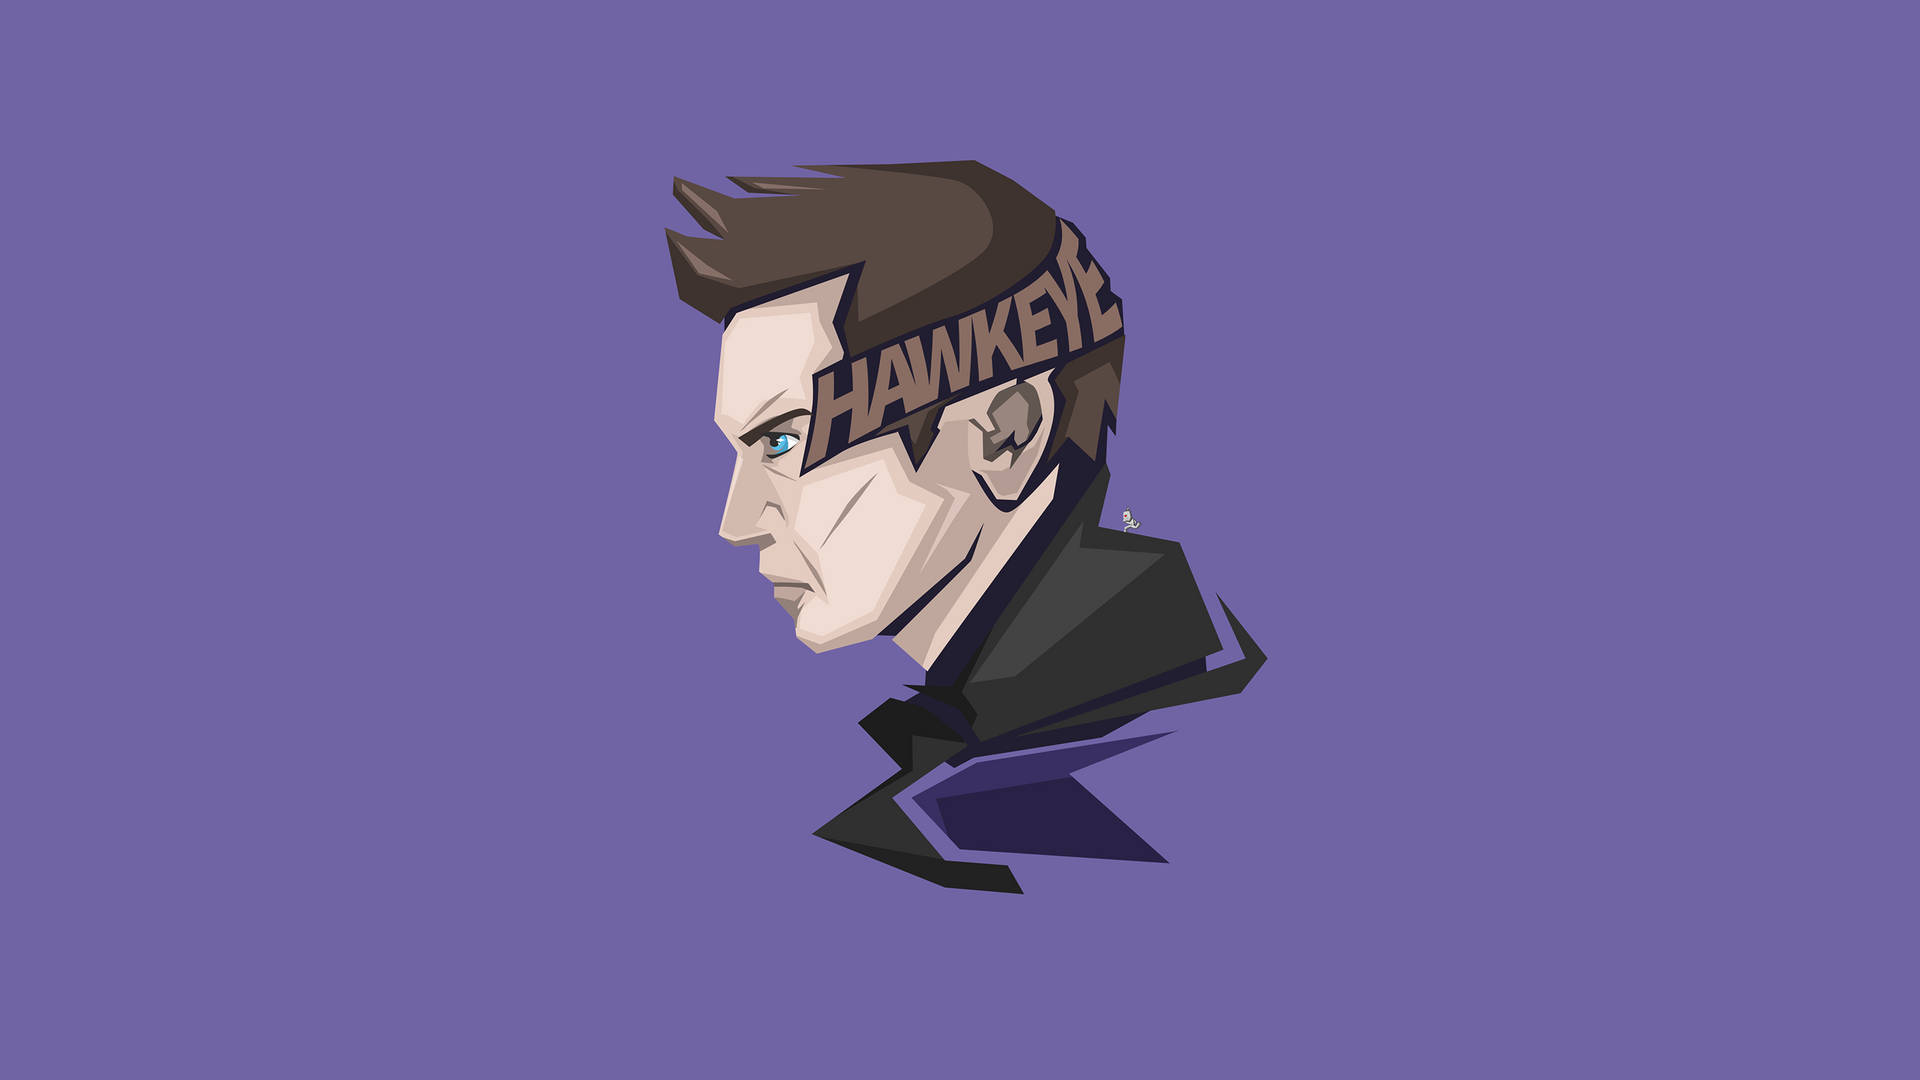 Hawkeye 7680X4320 Wallpaper and Background Image